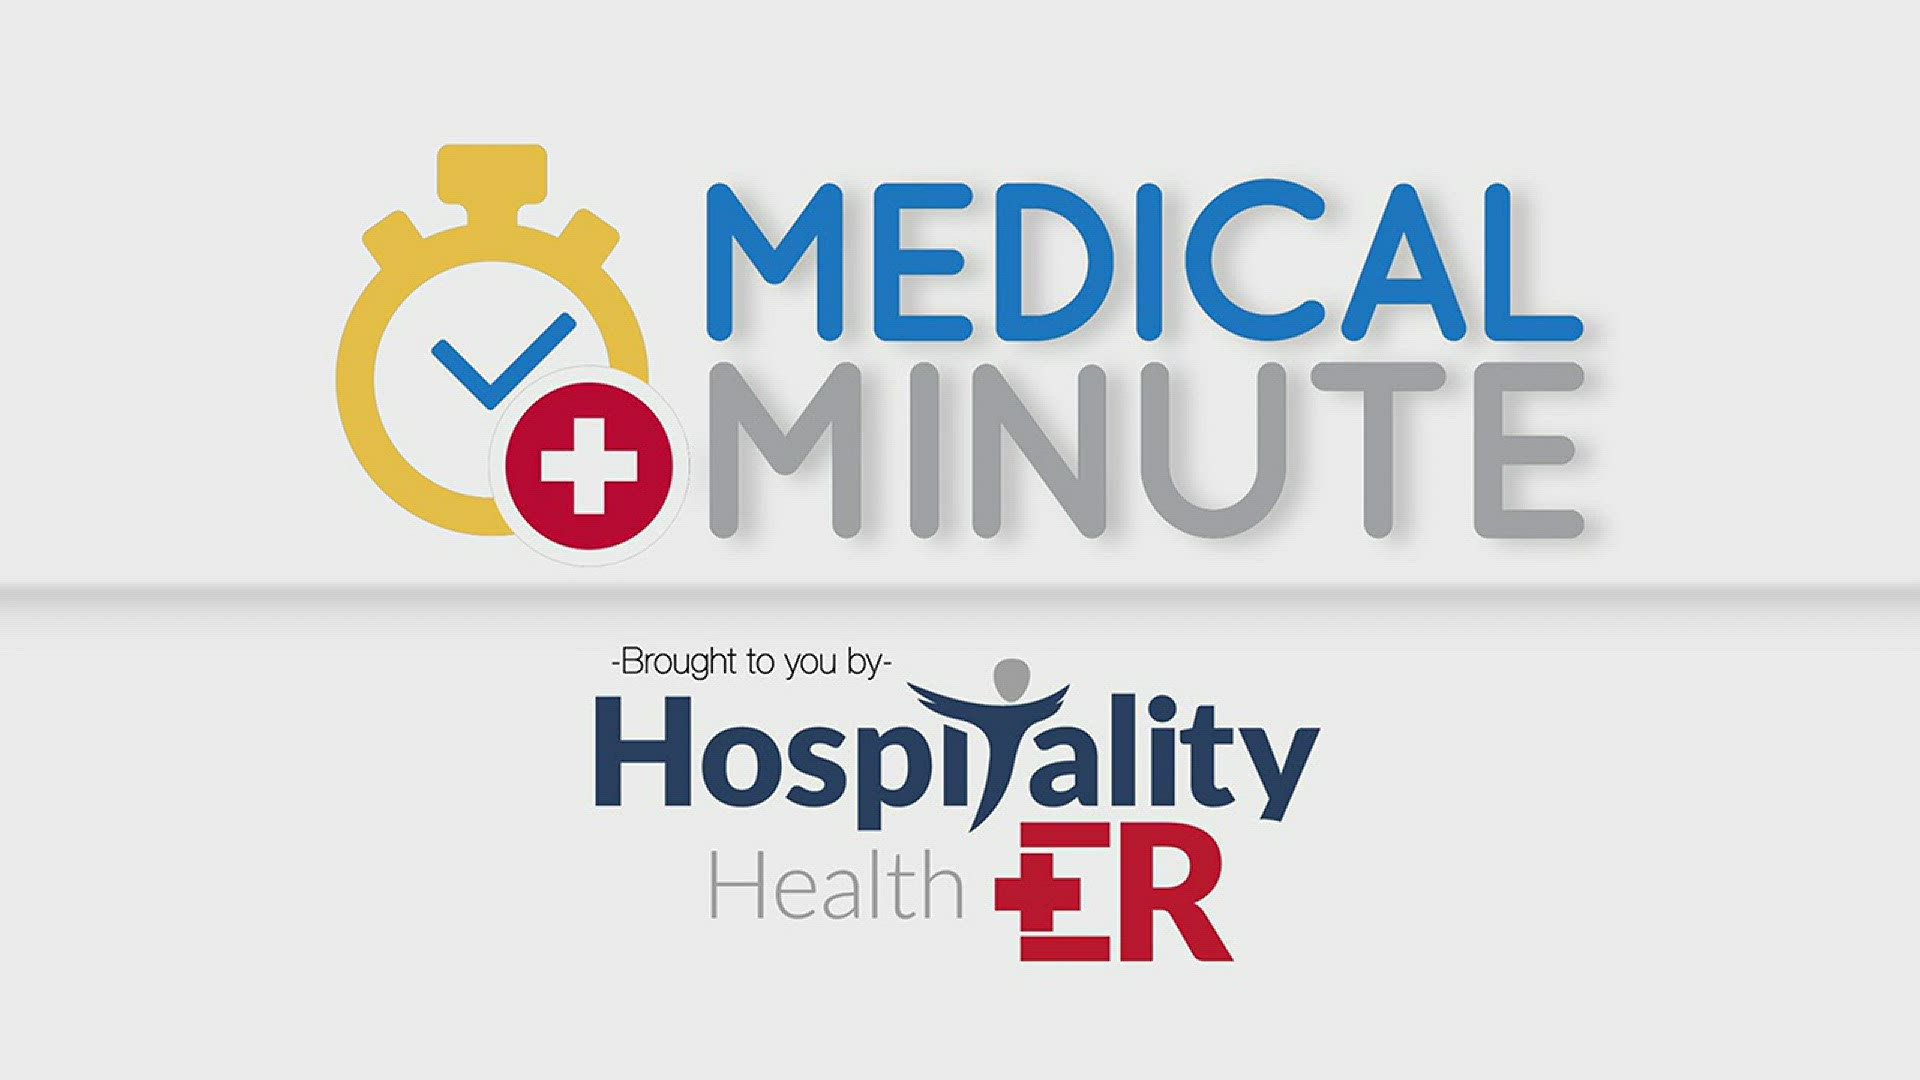 Beat the summer heat with today's Medical Minute!